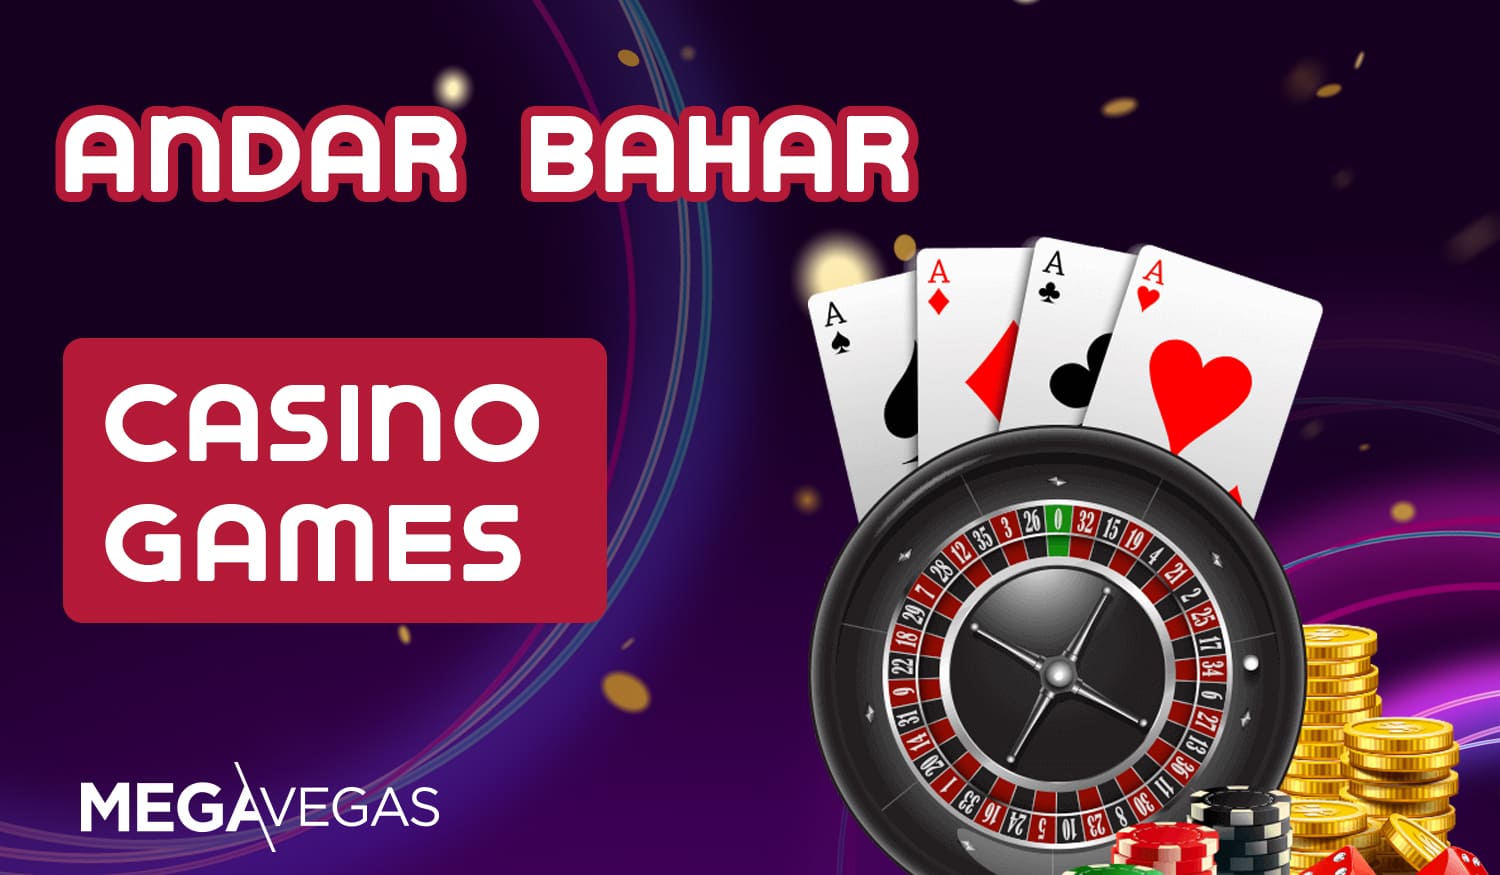 List of games available at Mega Vegas online casino site for live gaming fans